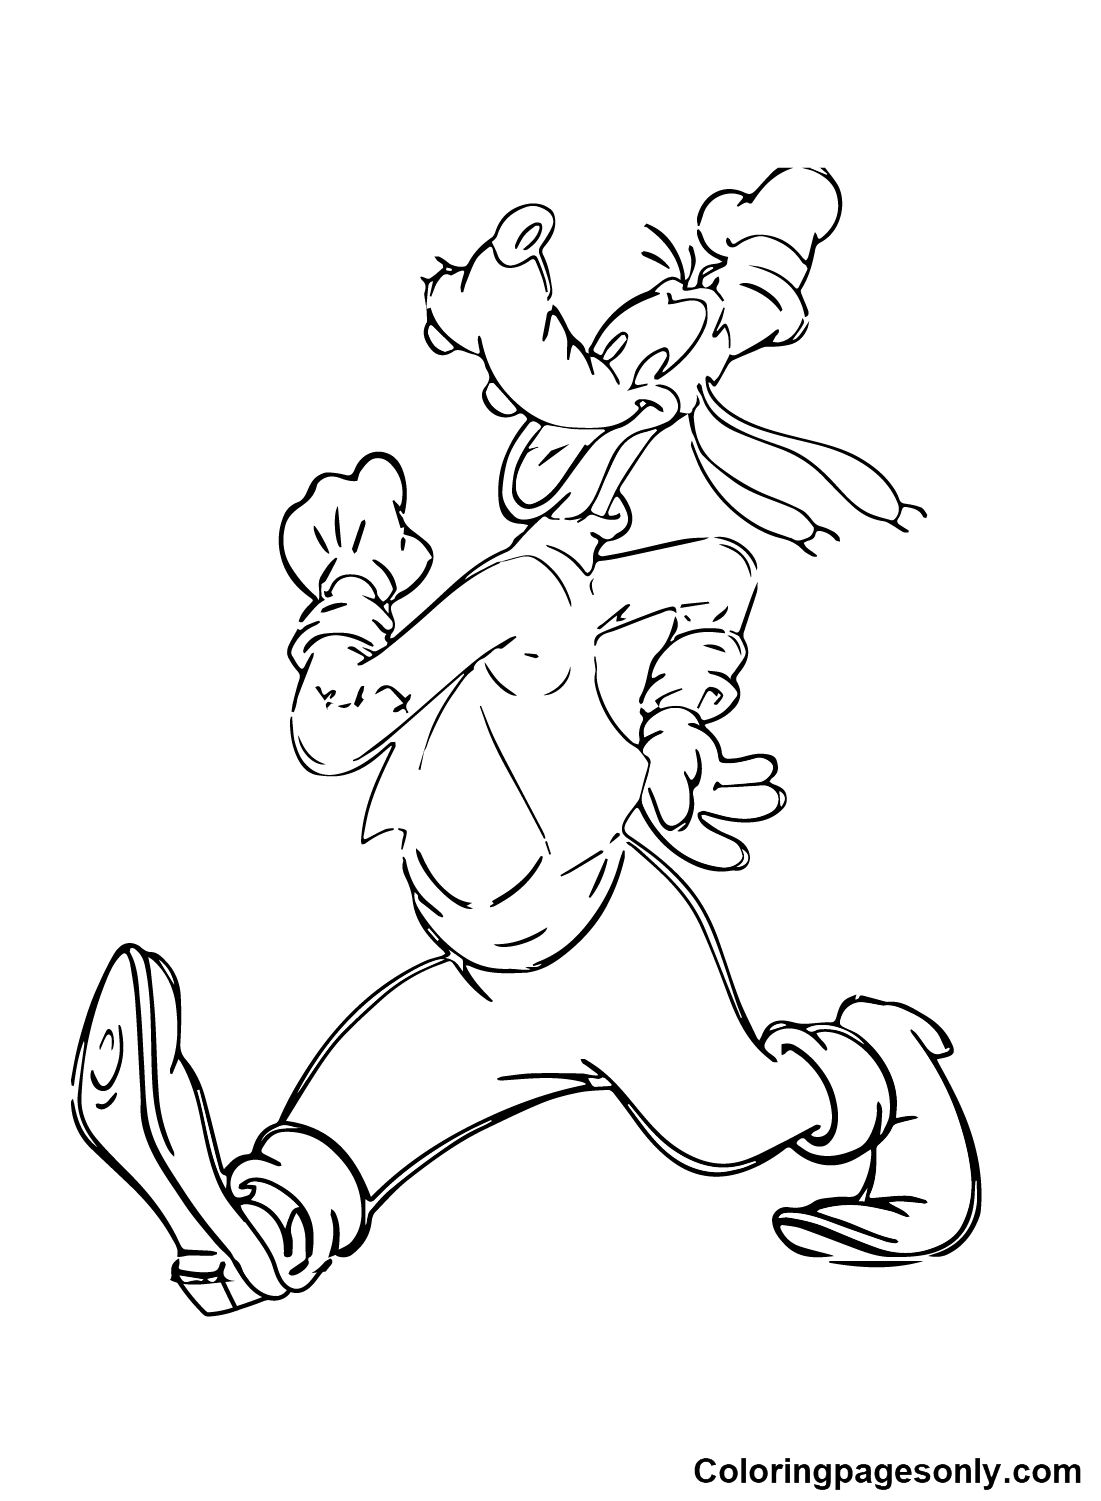 Goofy from Kingdom Hearts Coloring Page